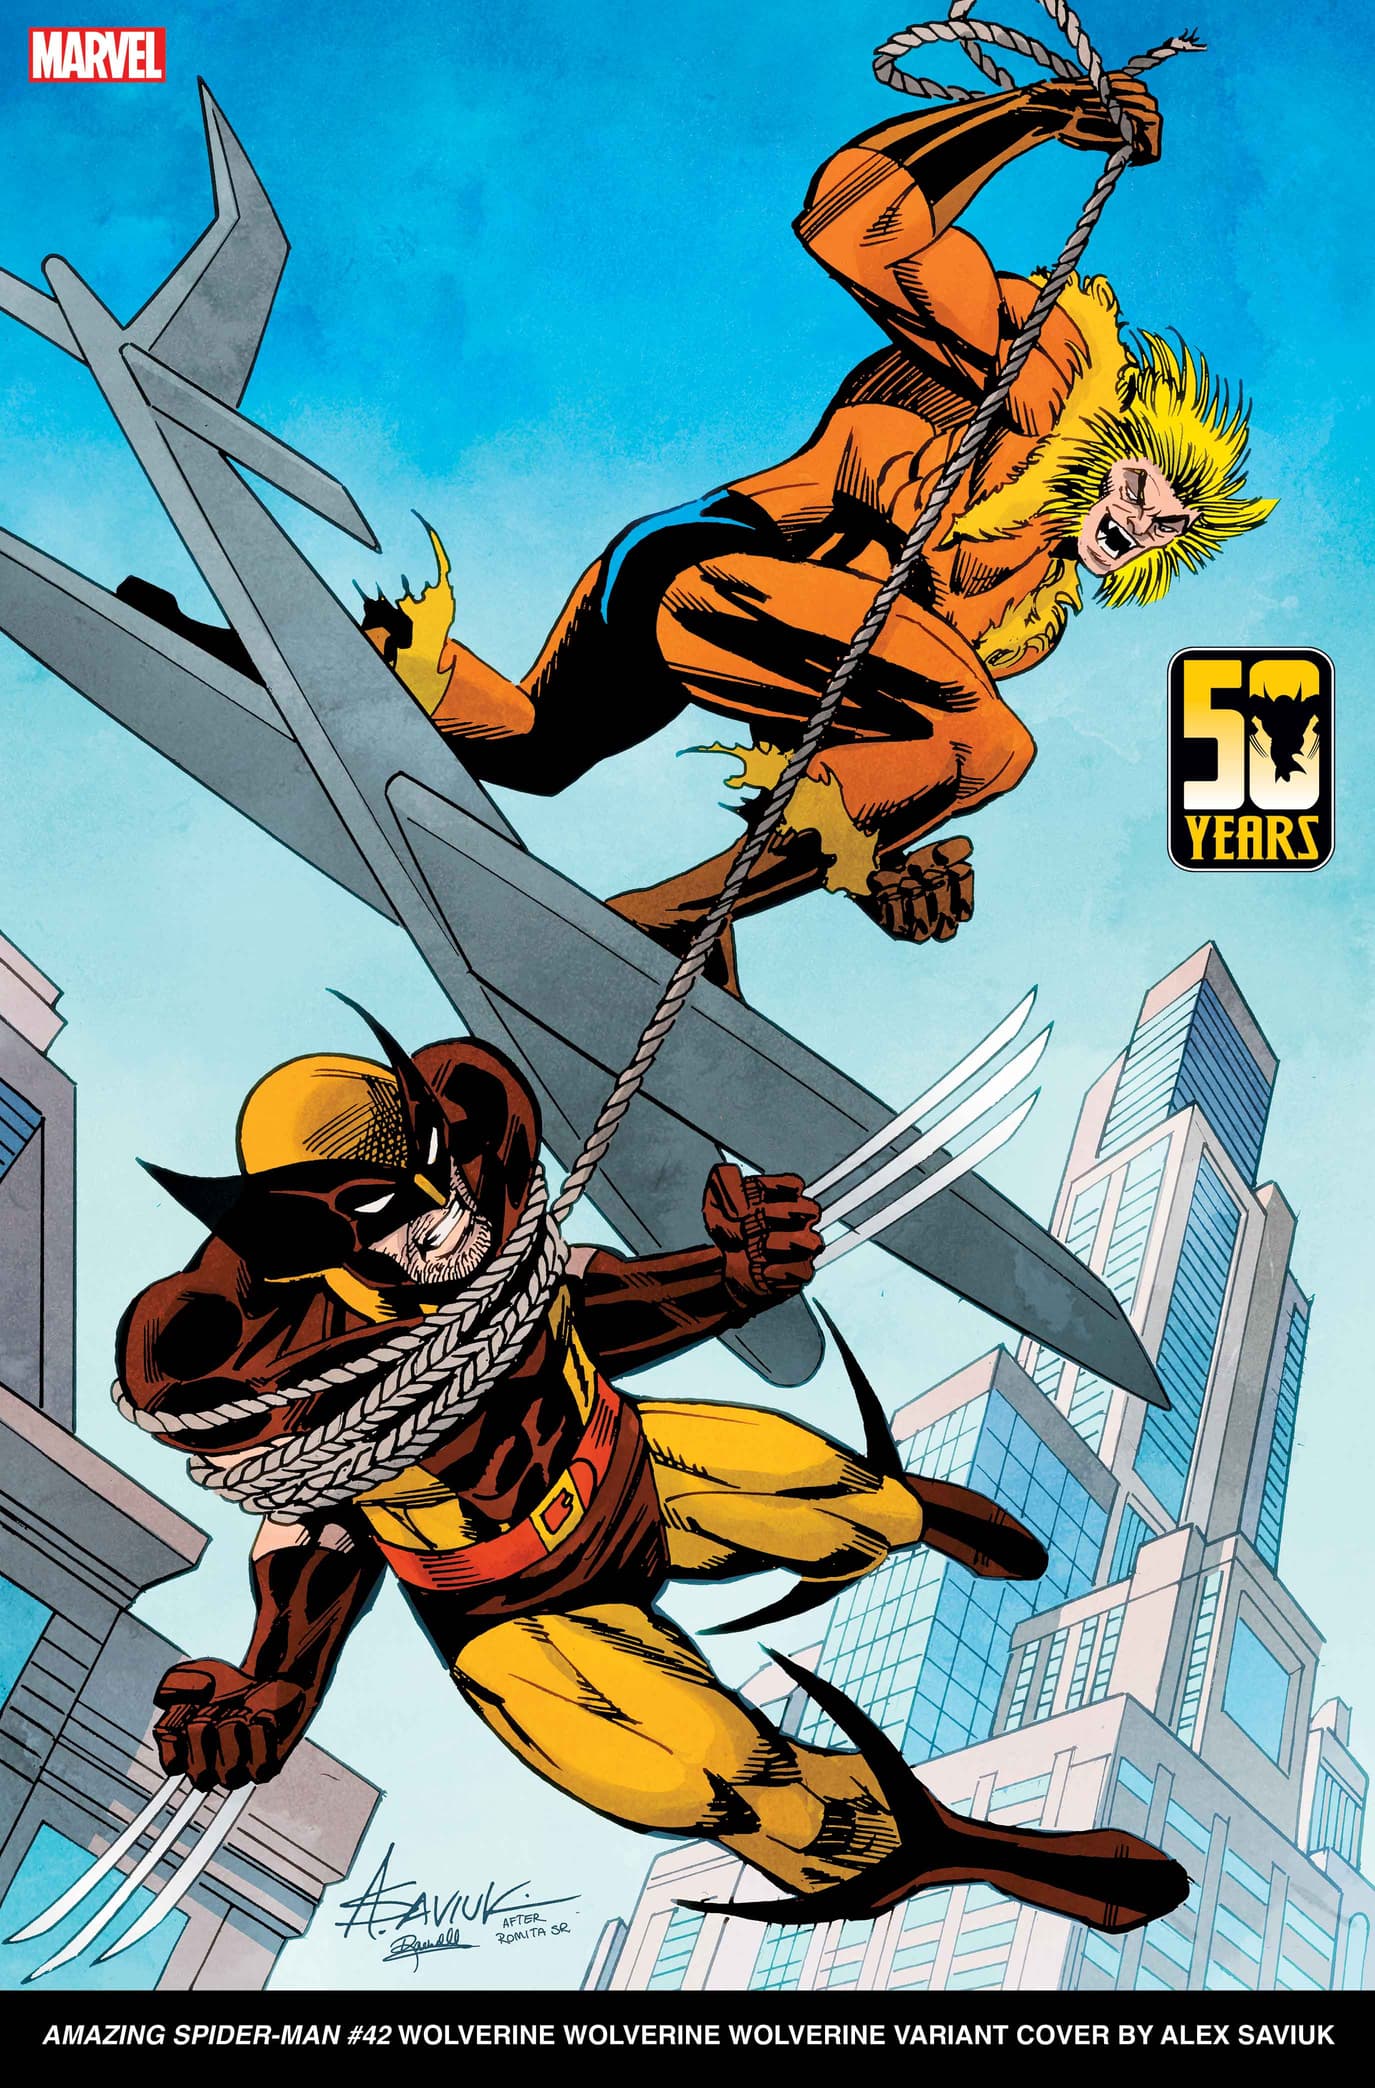 Wolverine Claws His Way Through Marvel History in New Covers | Marvel